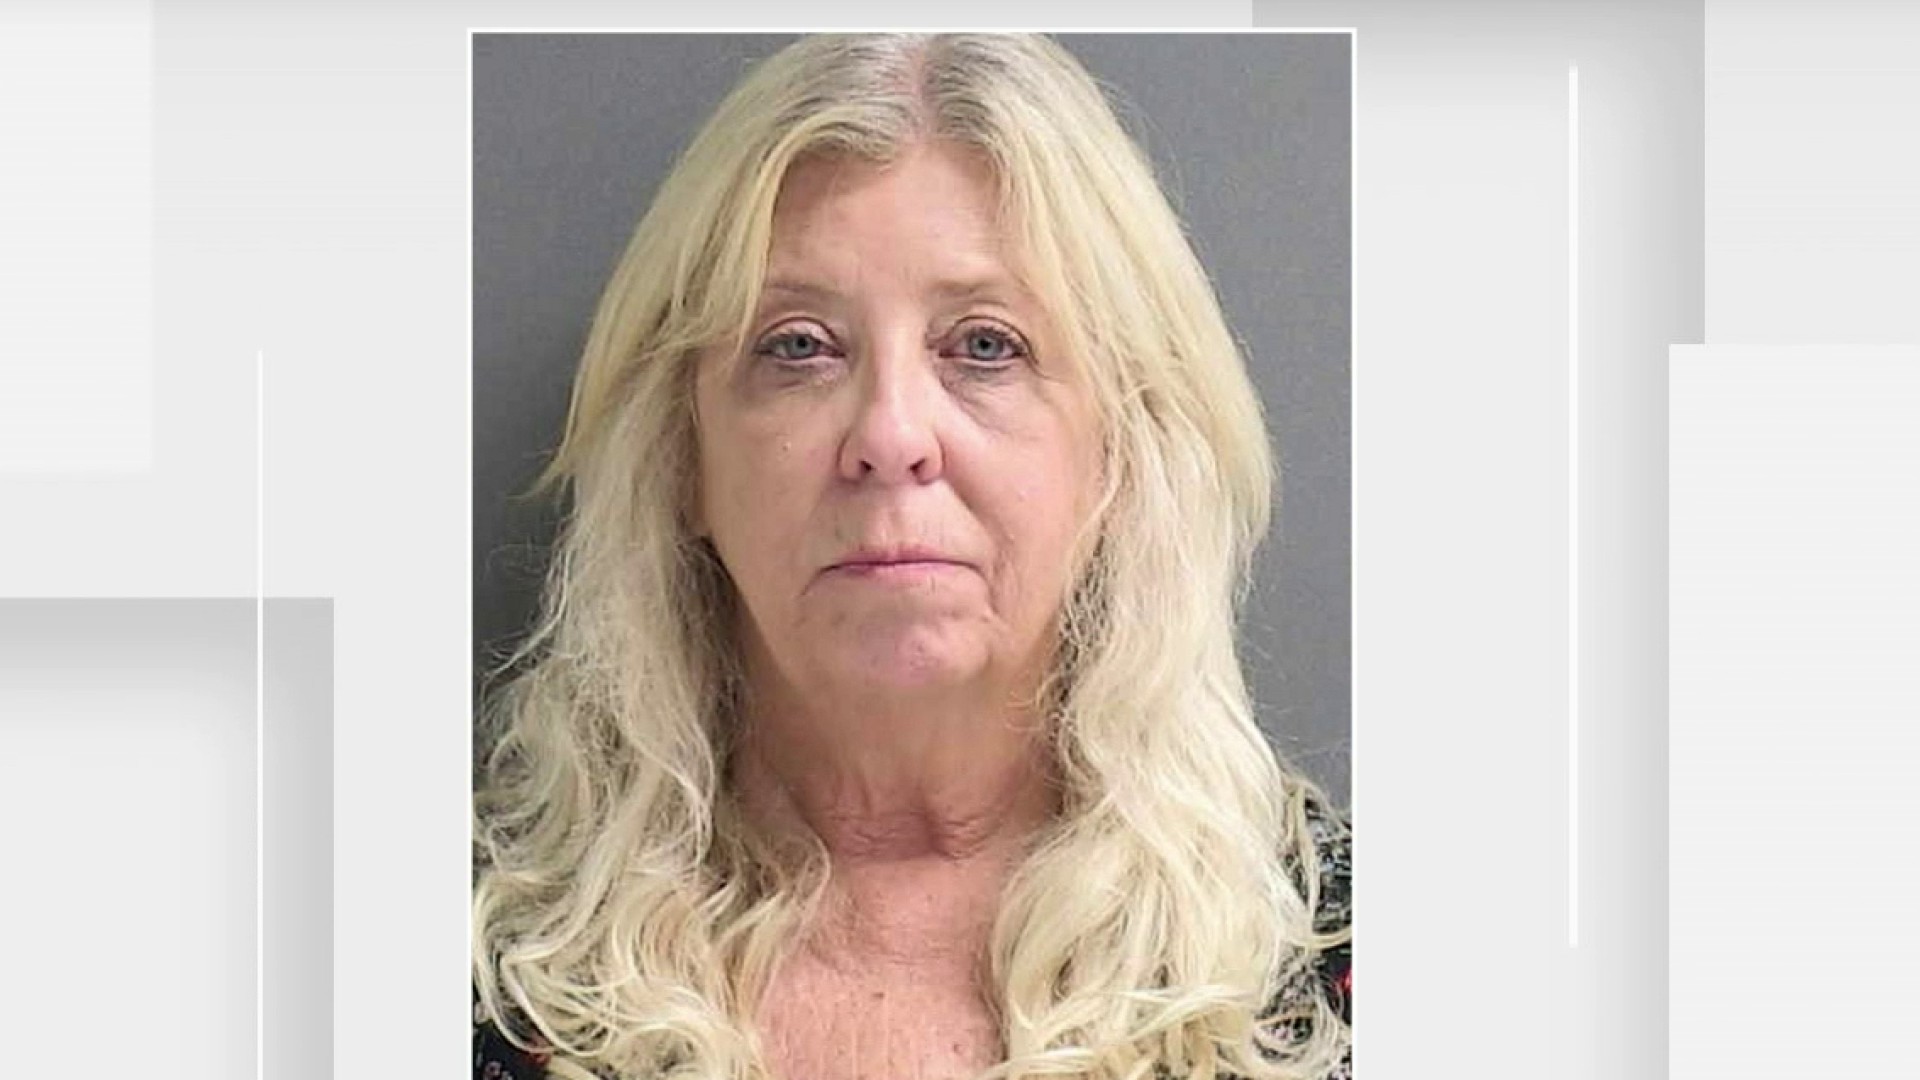 Woman faces DUI, manslaughter charges after crash kills motorcyclist in Orange City